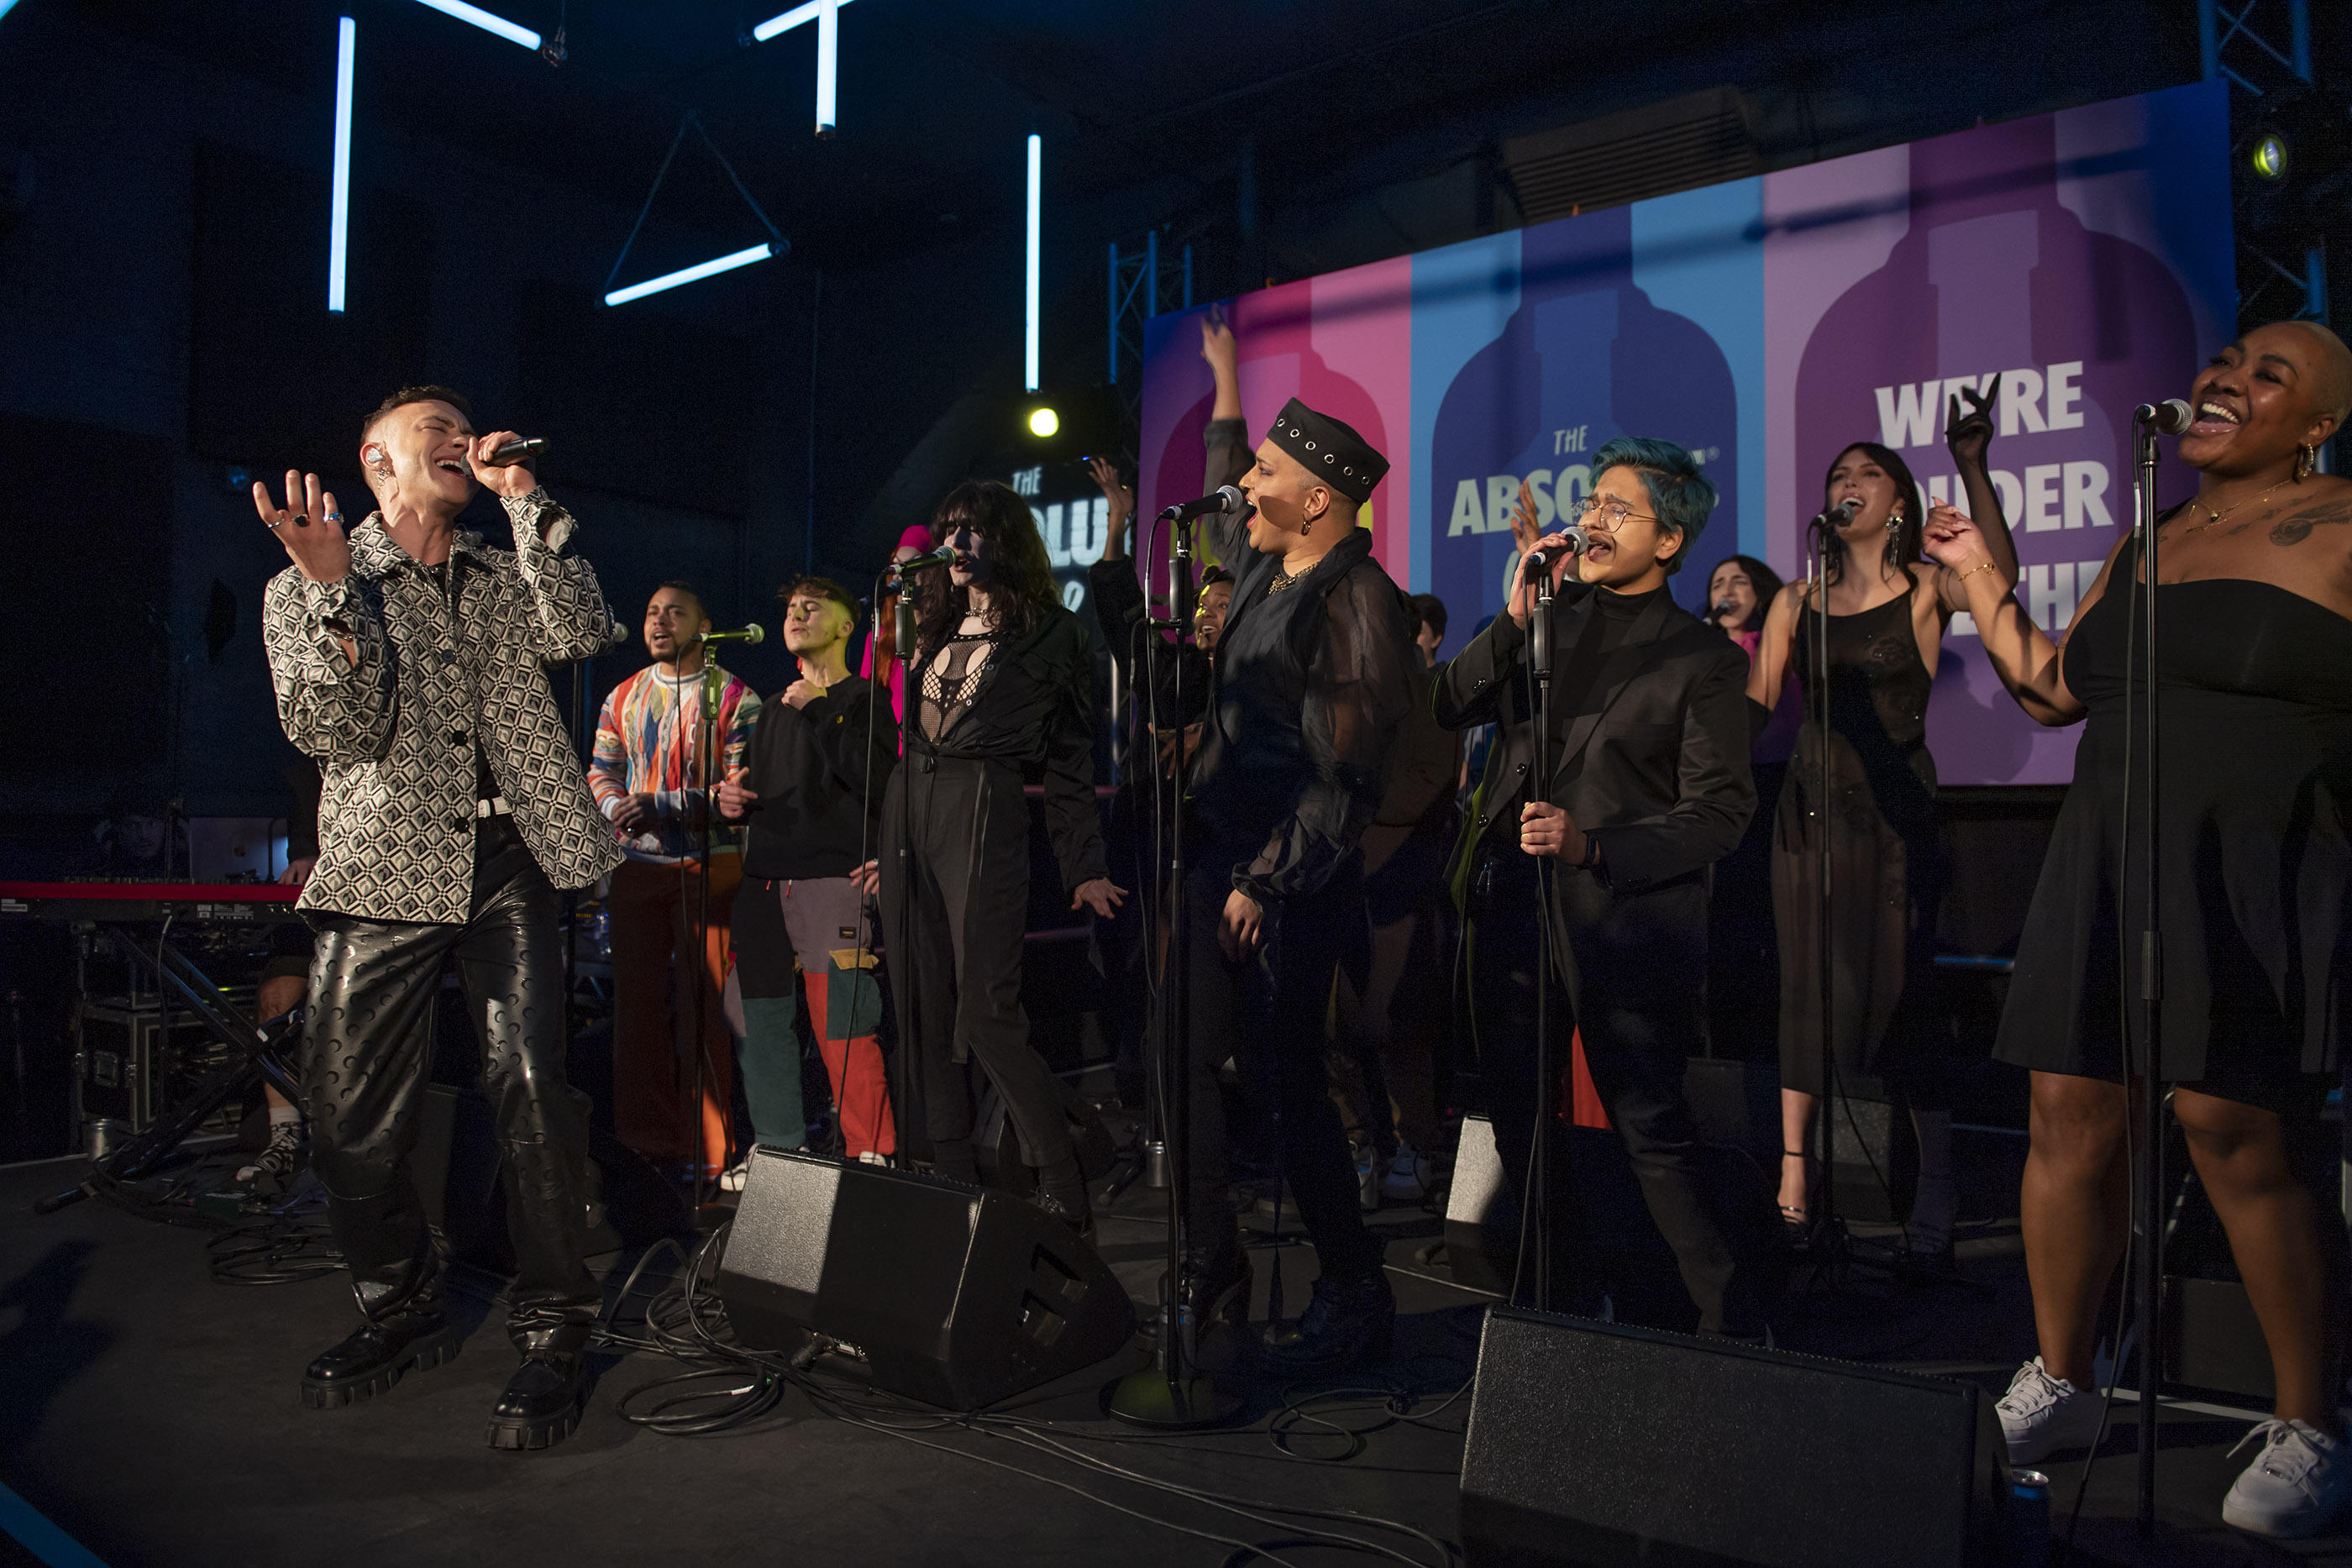 Olly Alexander performs with The Absolut Choir